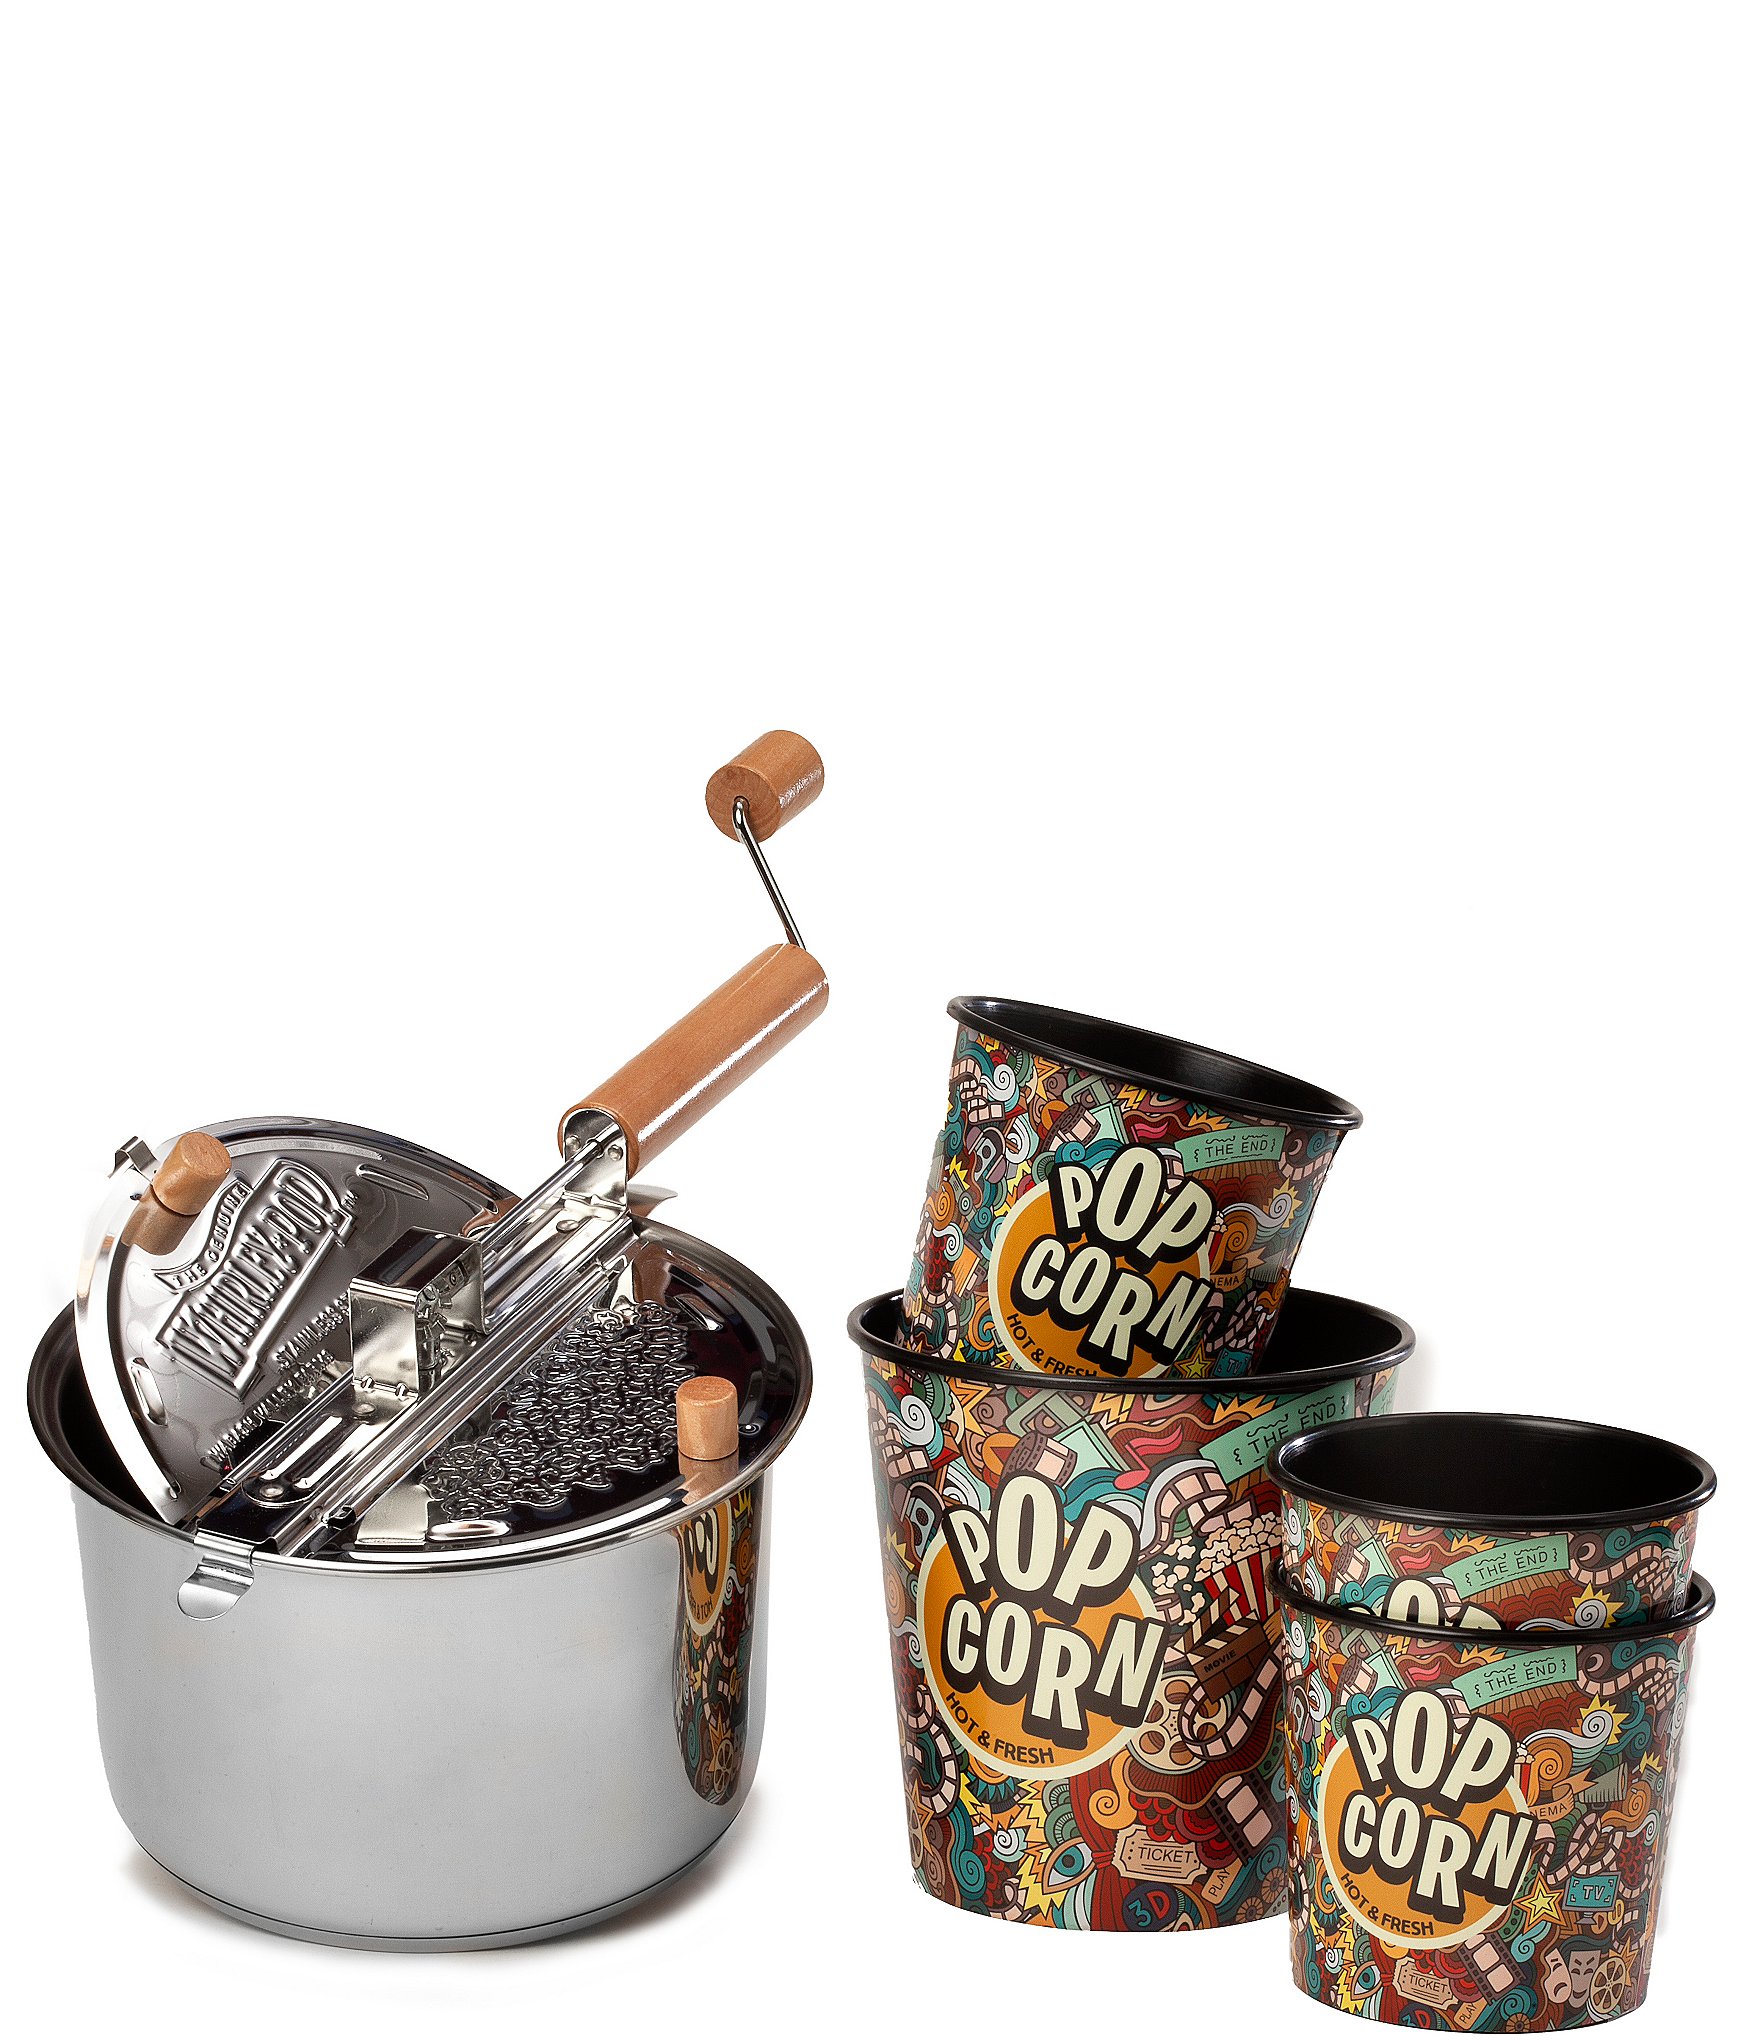 https://dimg.dillards.com/is/image/DillardsZoom/zoom/wabash-valley-farms-stainless-steel-whirley-pop-with-graffiti-tubs/20232138_zi.jpg